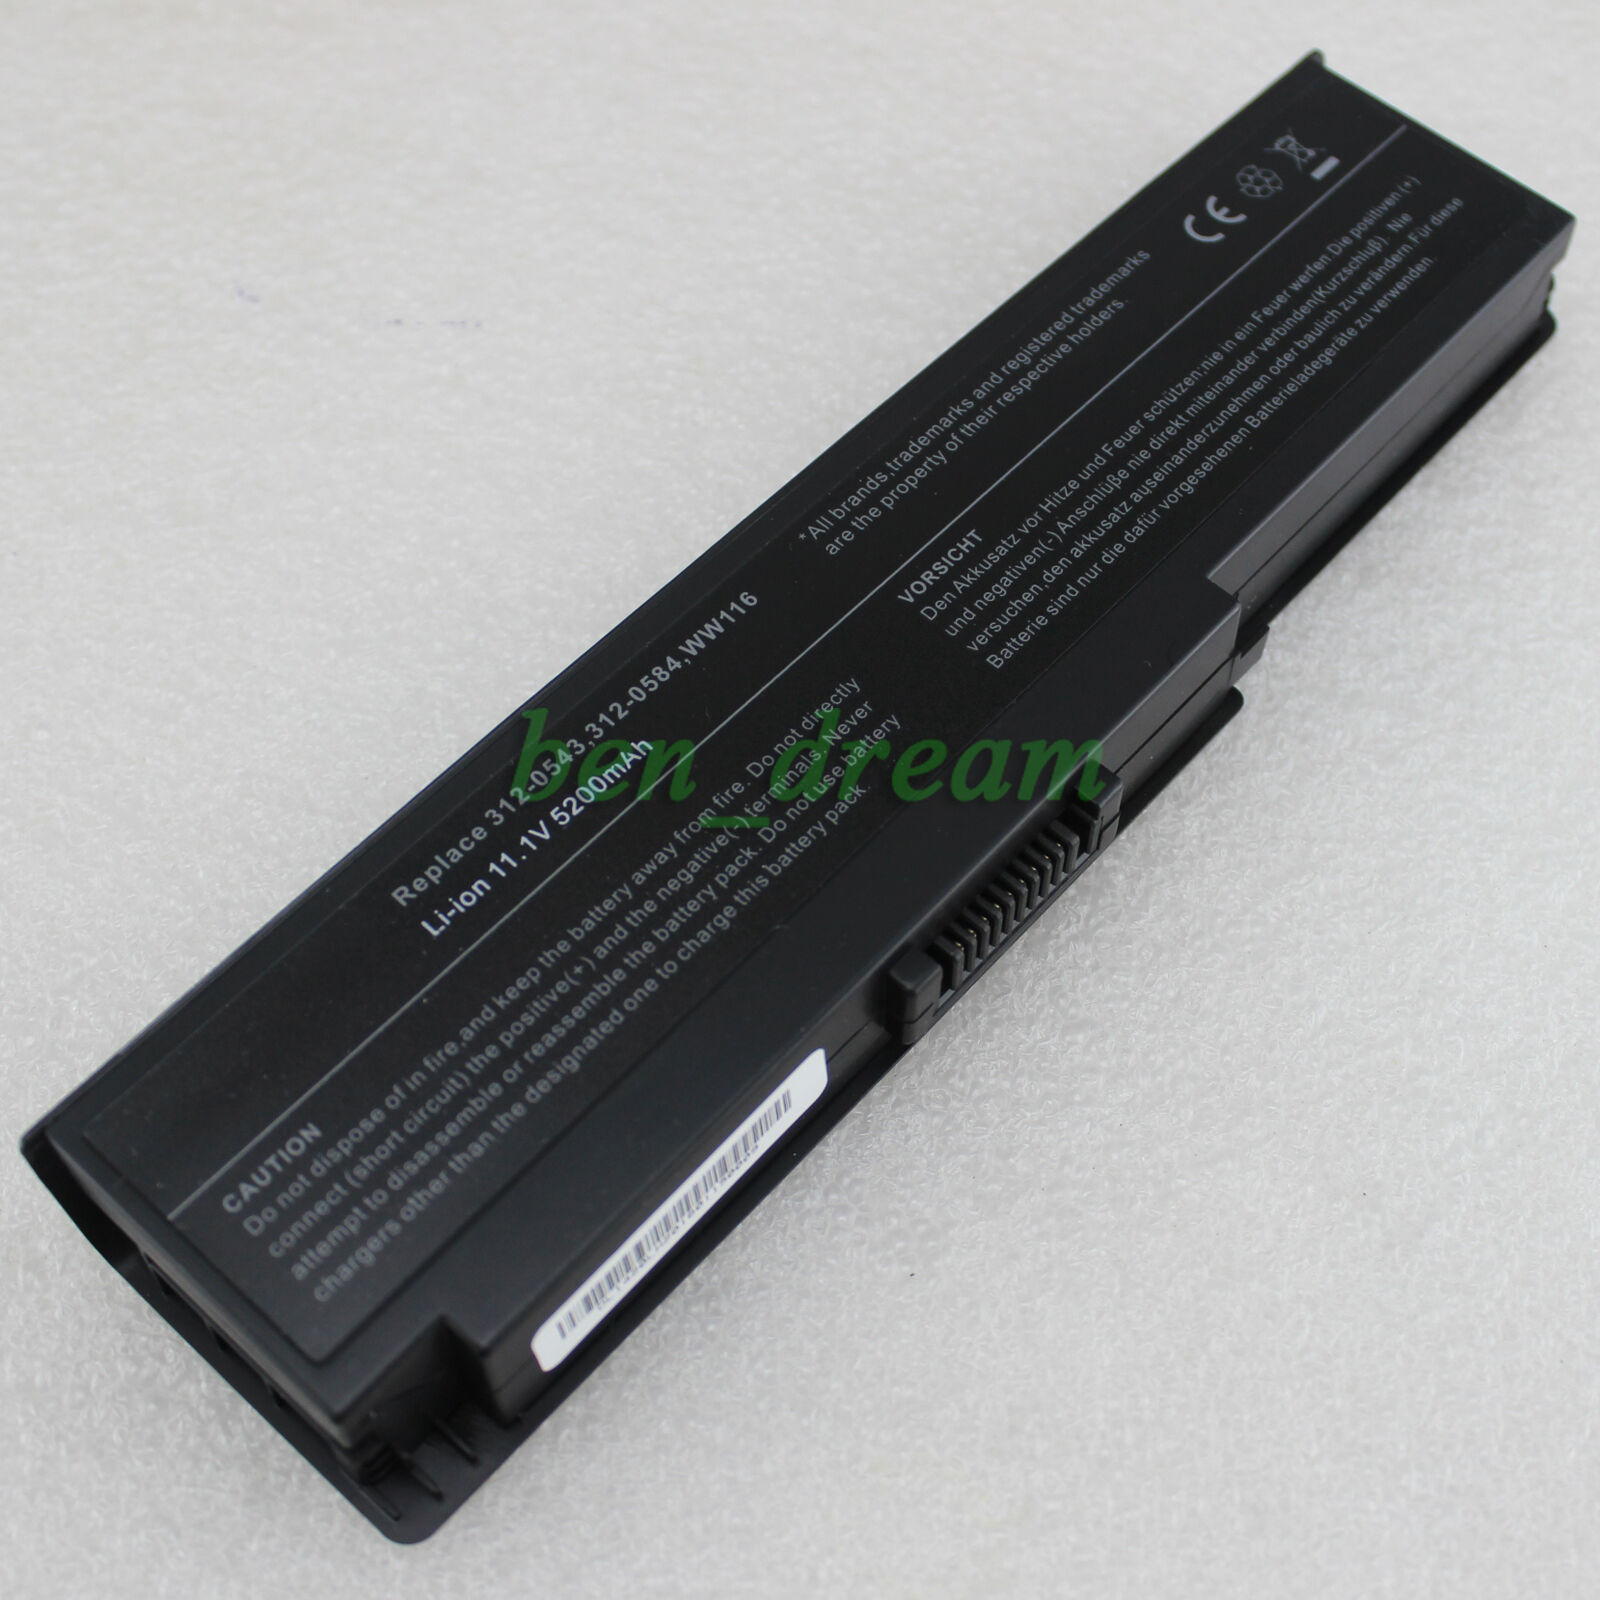 6Cell Battery for Dell Inspiron 1420 Vostro 1400 312-0543 312-0584 FT080 WW116